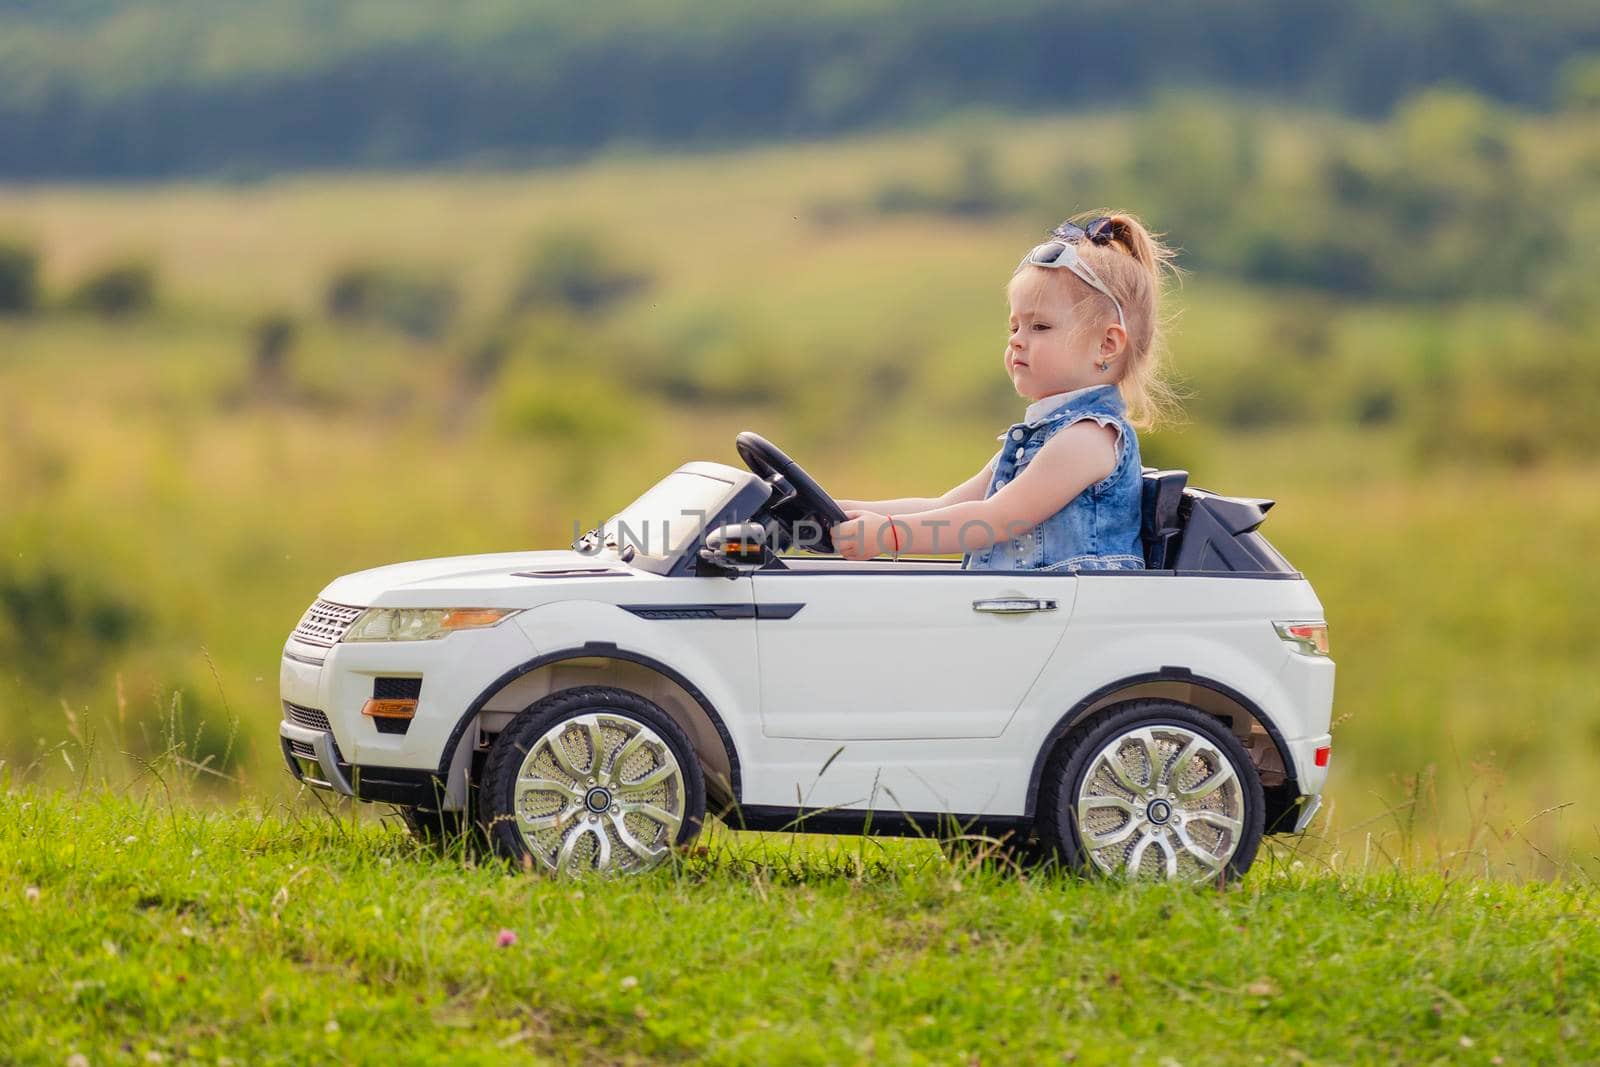 little girl rides on a children's car on a green lawn